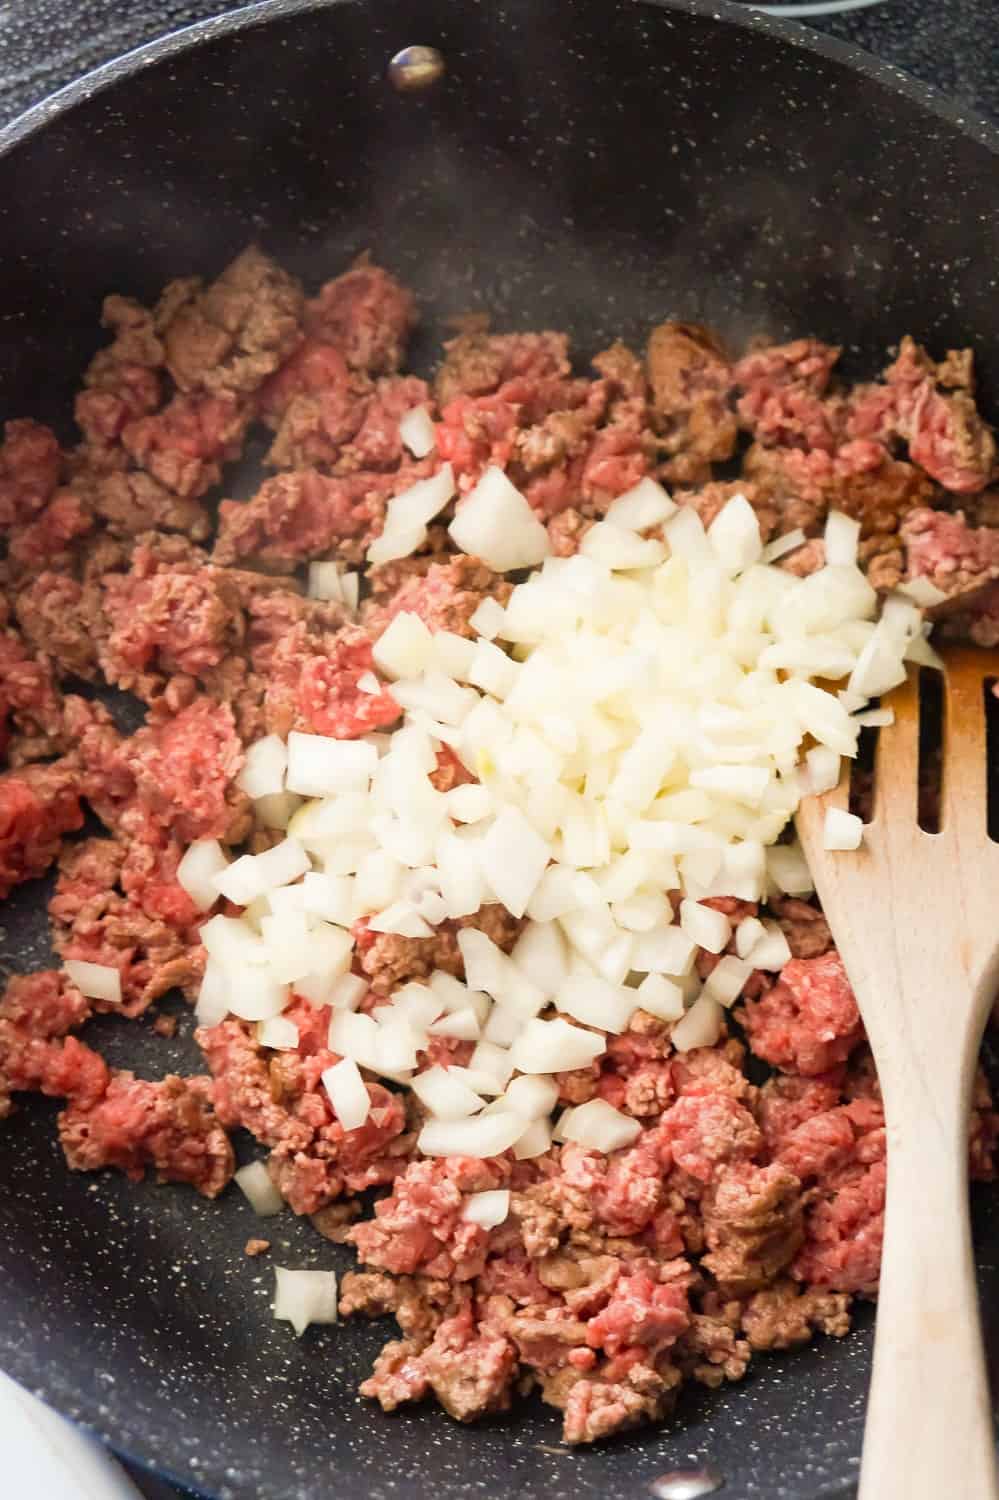 diced onions on top of raw ground beef in a frying pan